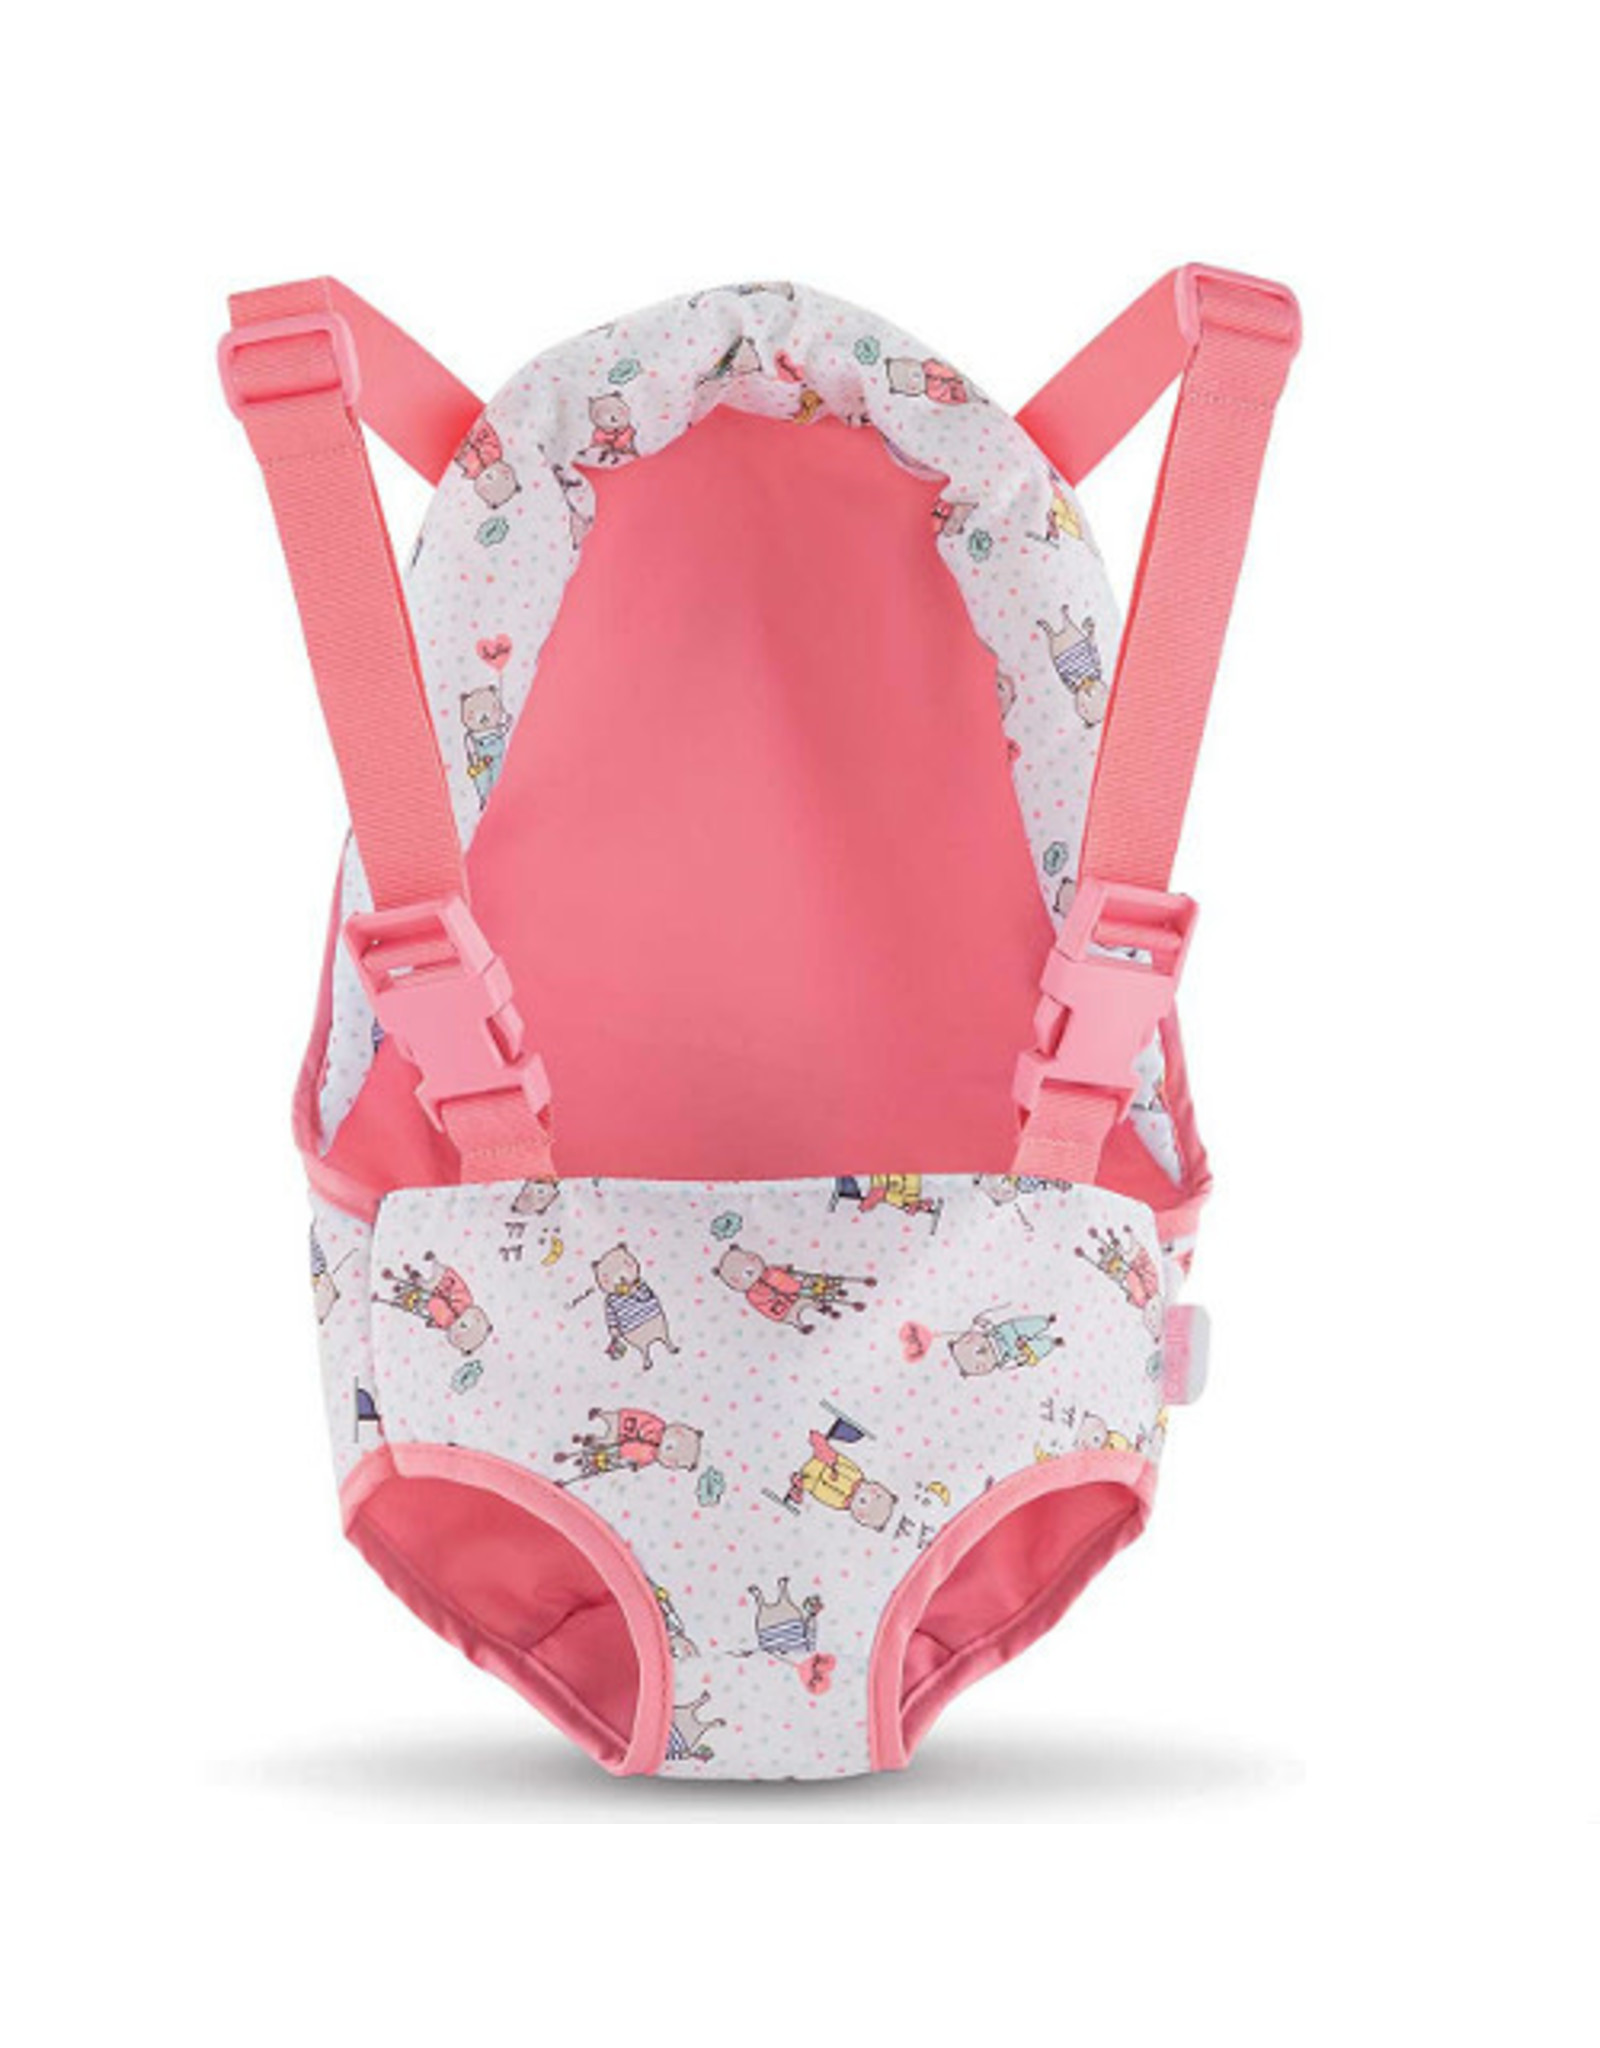 Corolle BB14" Baby Doll Sling